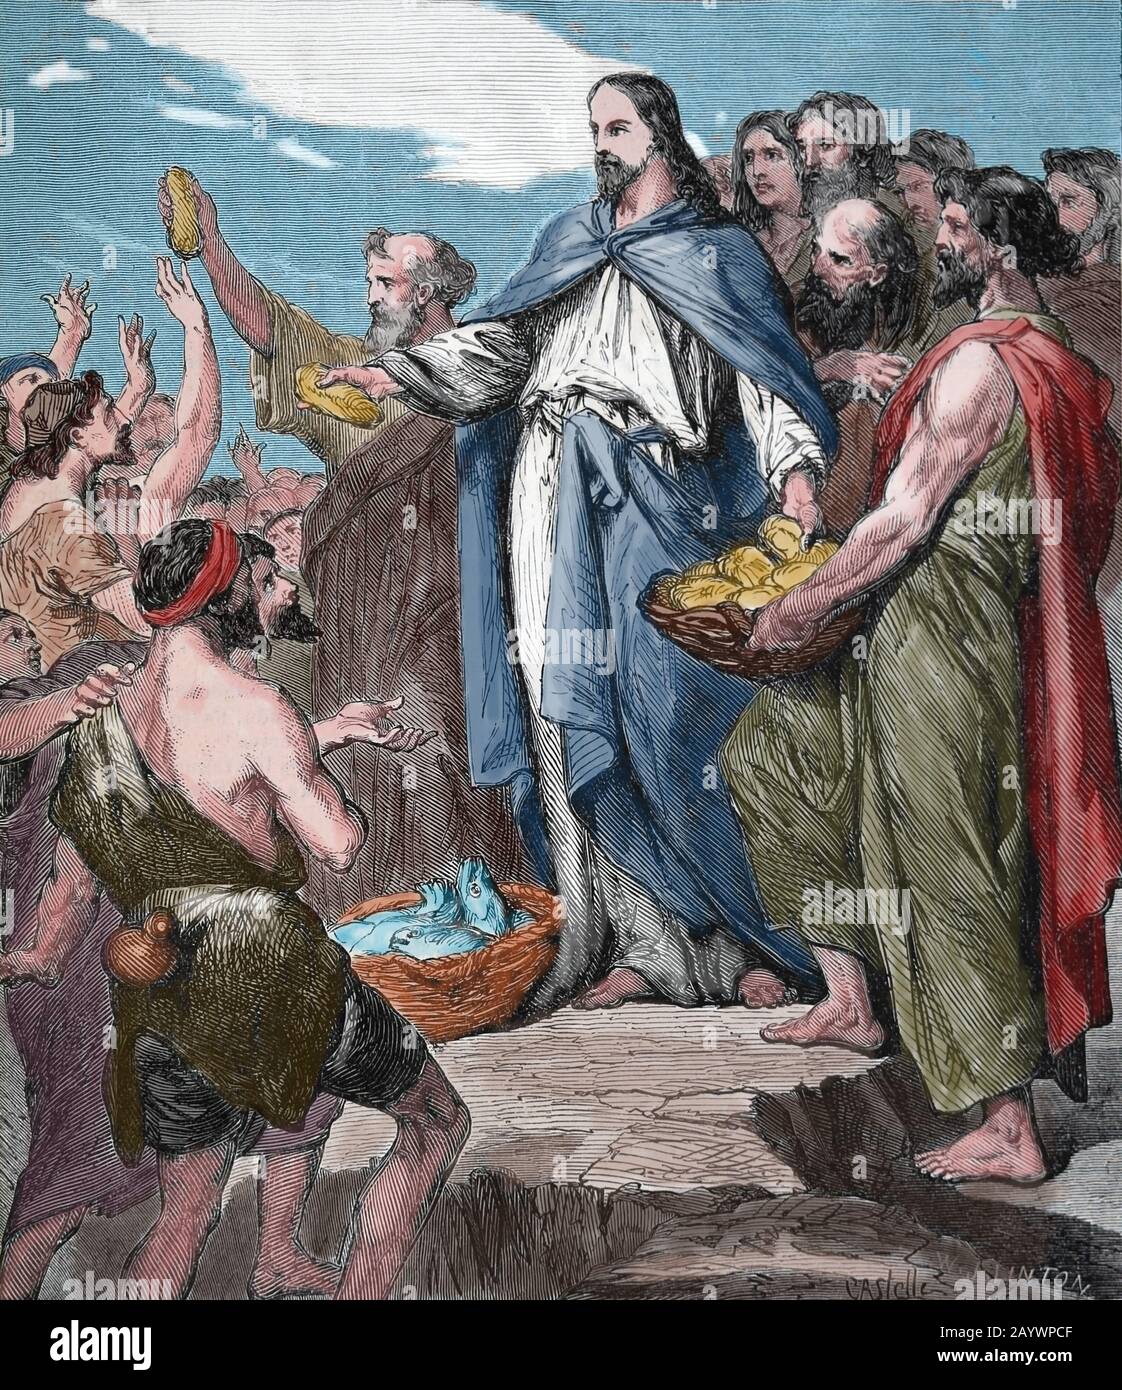 New Testament. Feeding the multitude. Miracle of Jesus. Engraving, 19th century. Stock Photo